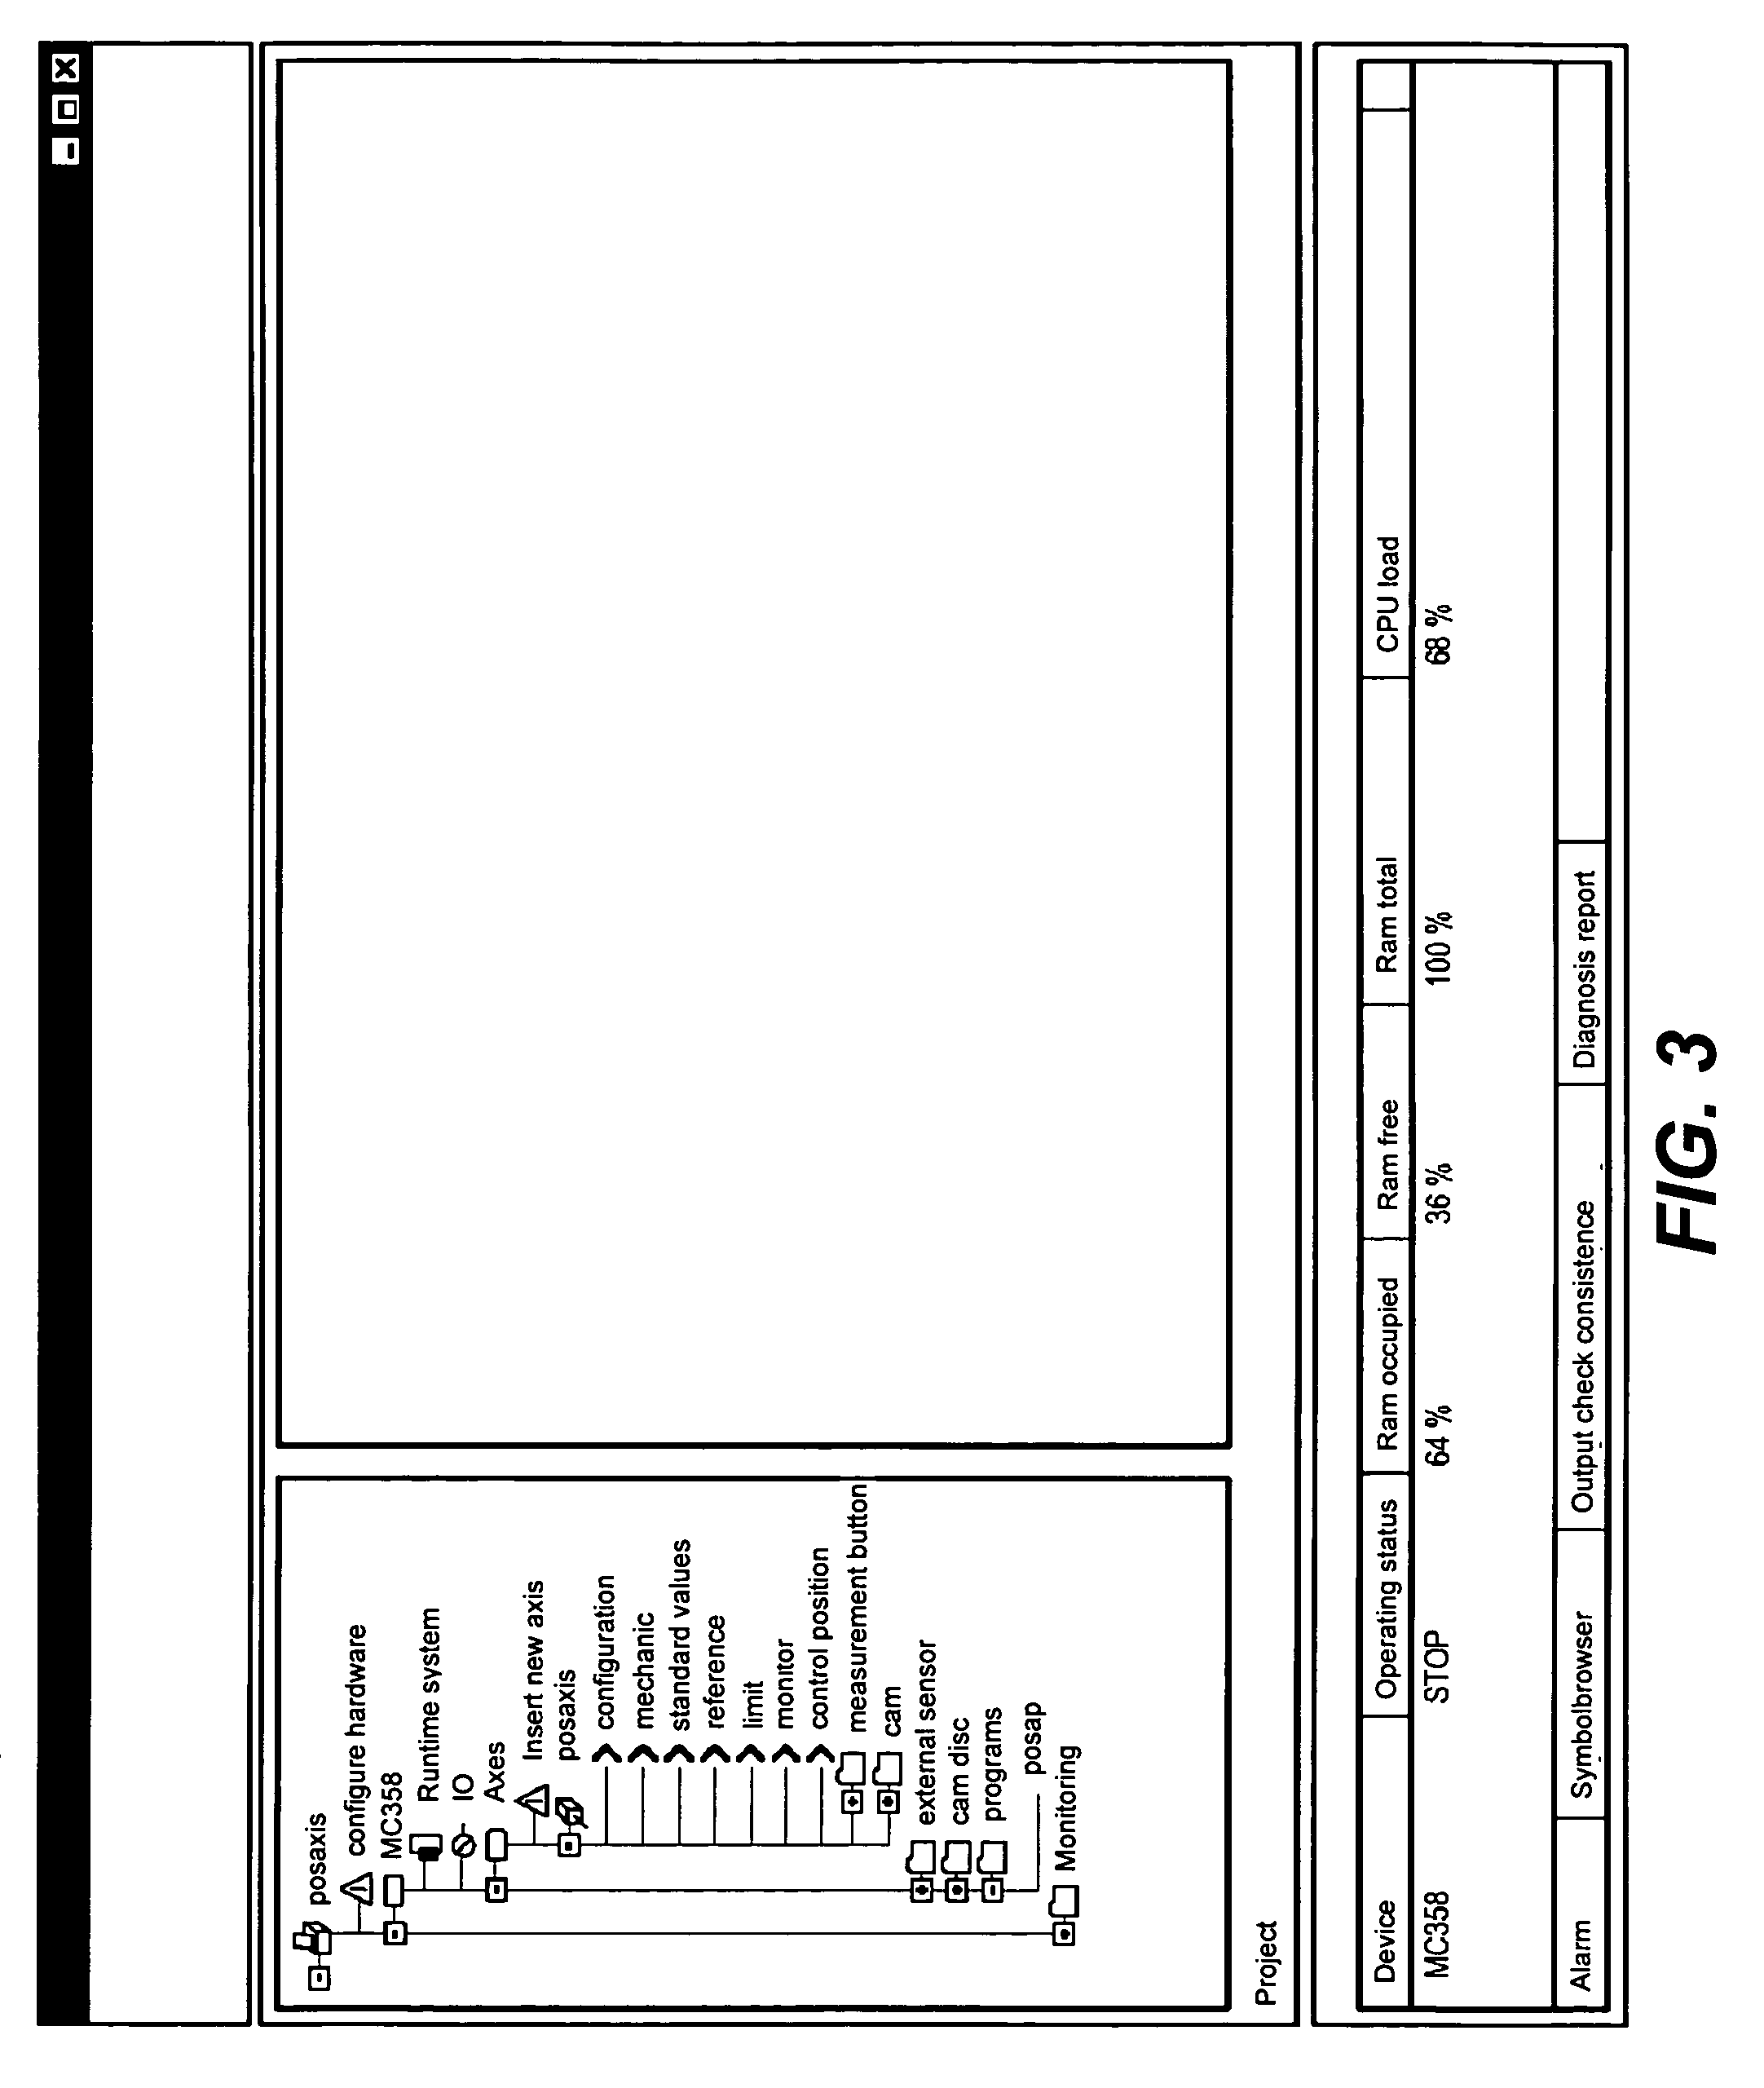 Apparatus and method for commissioning and diagnosing control systems